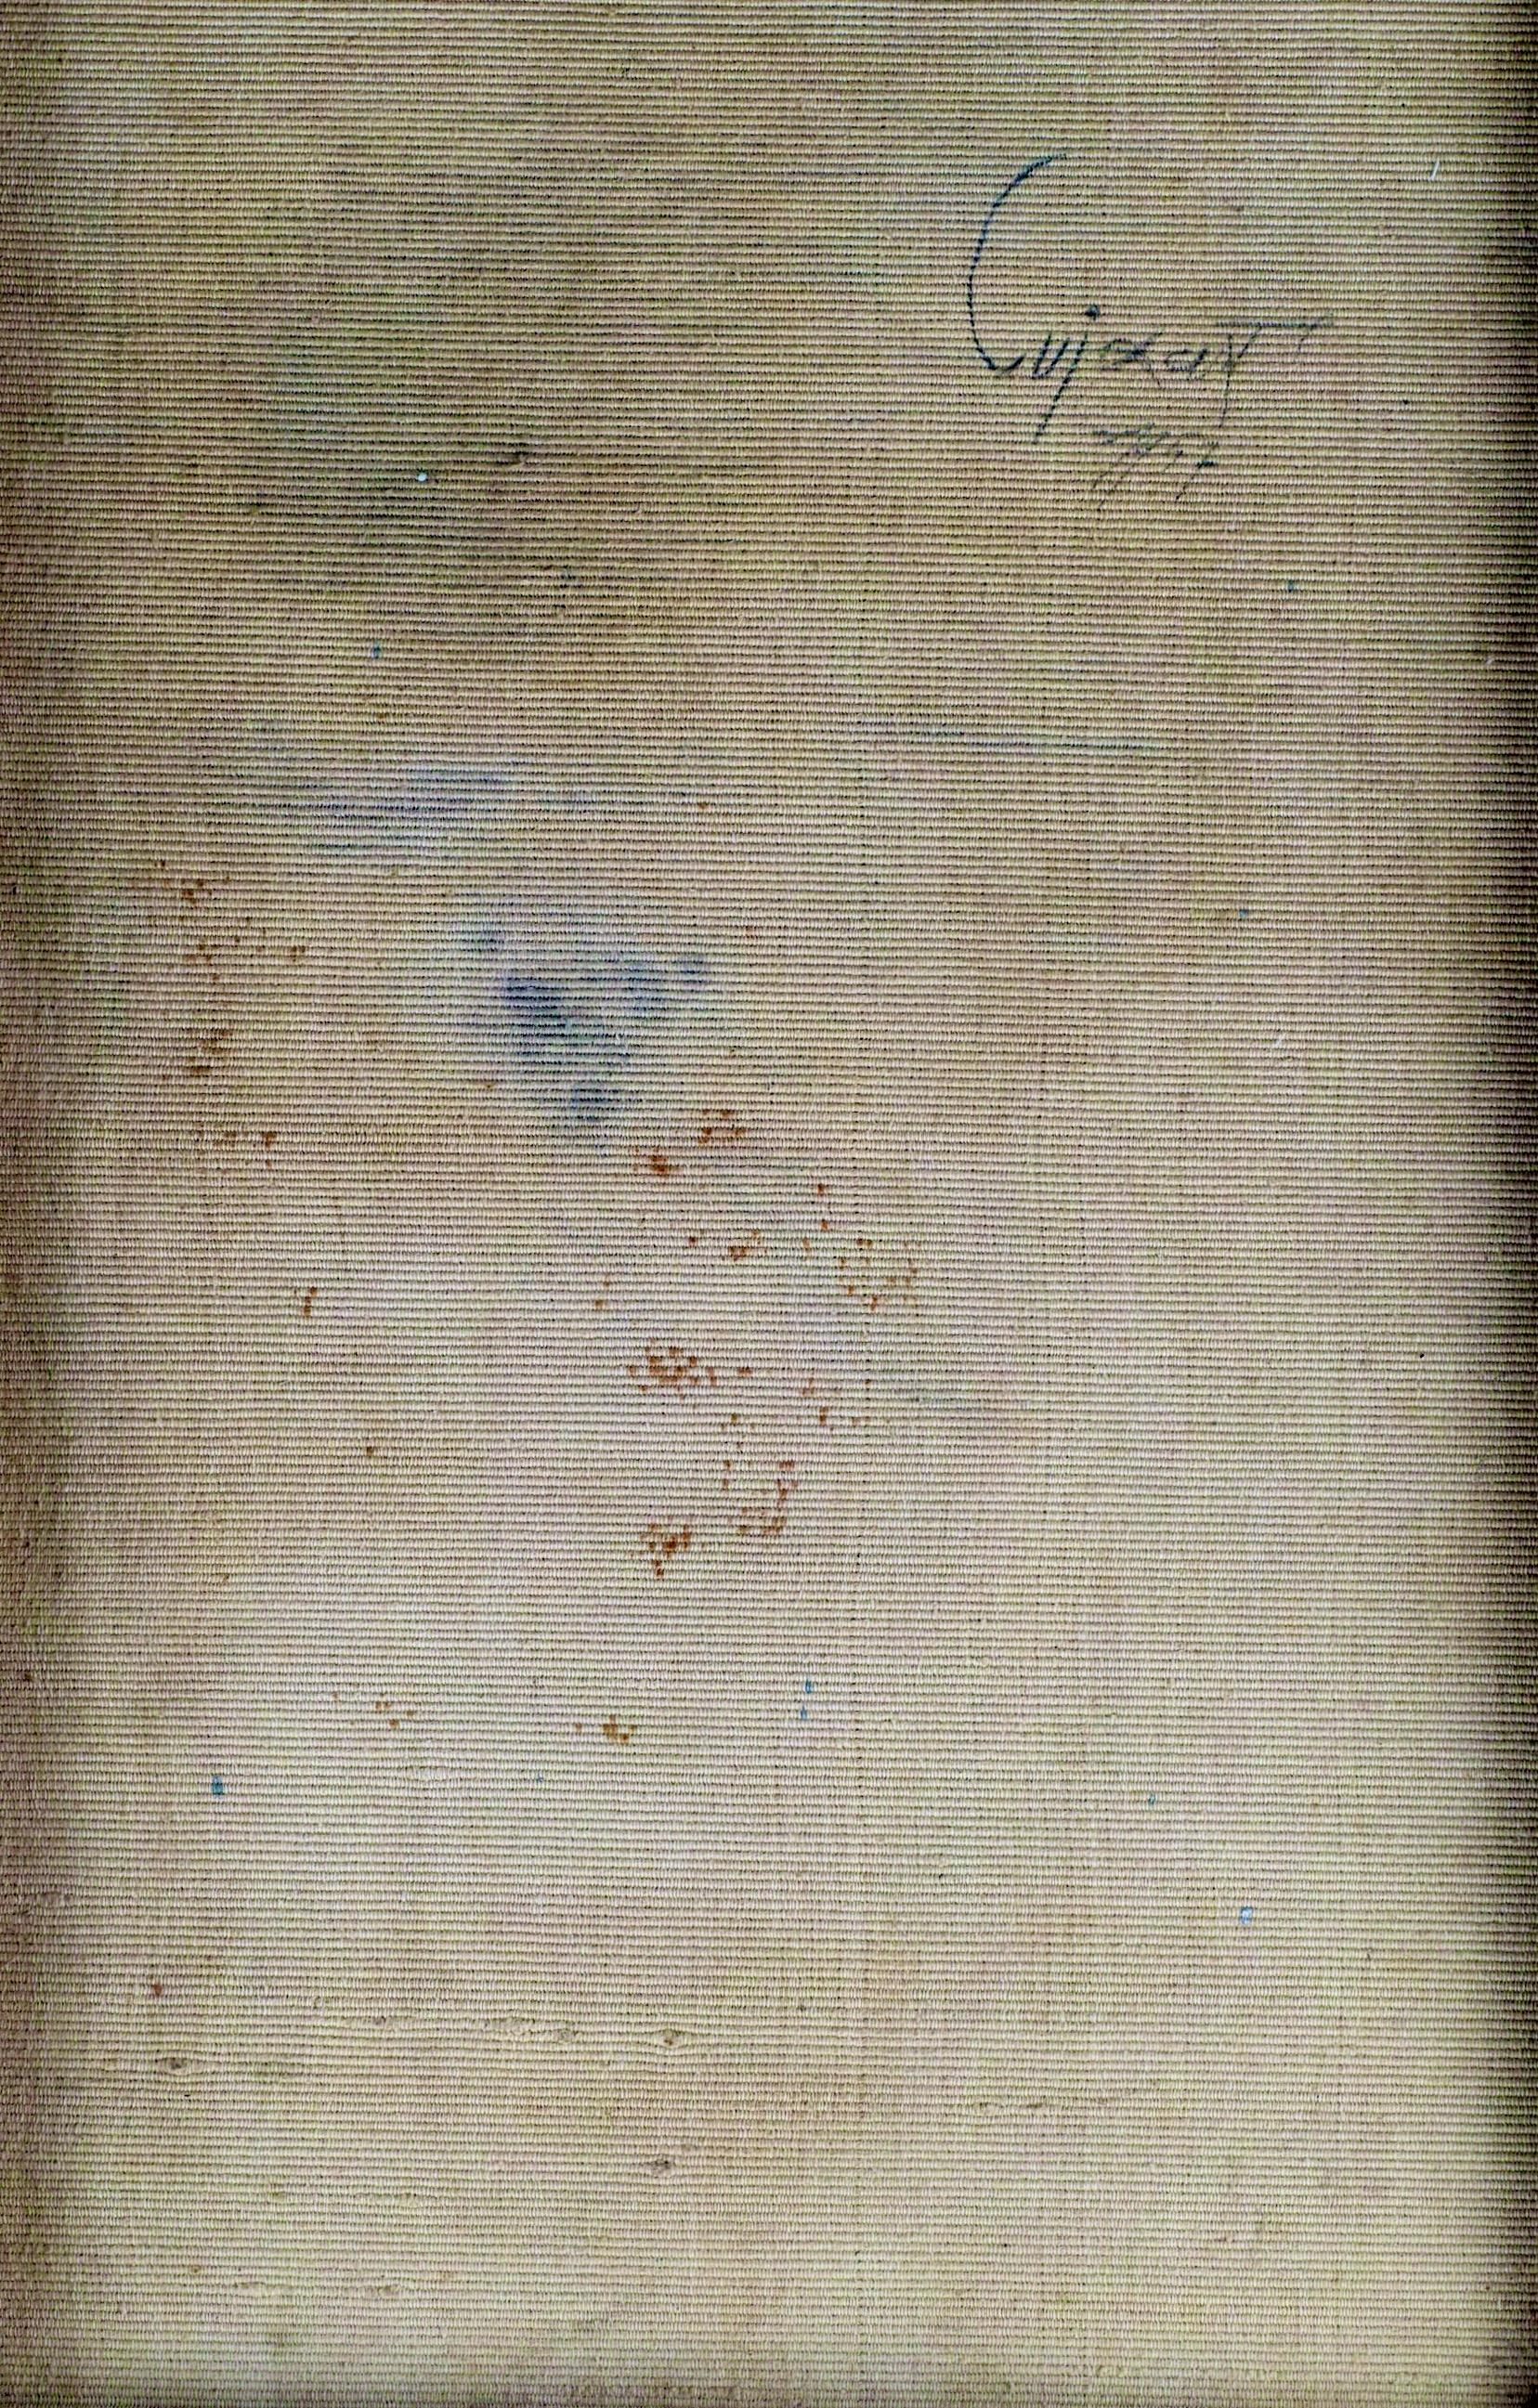 Abstract Composition, 1957 - Painting by Modest Cuixart i Tàpies